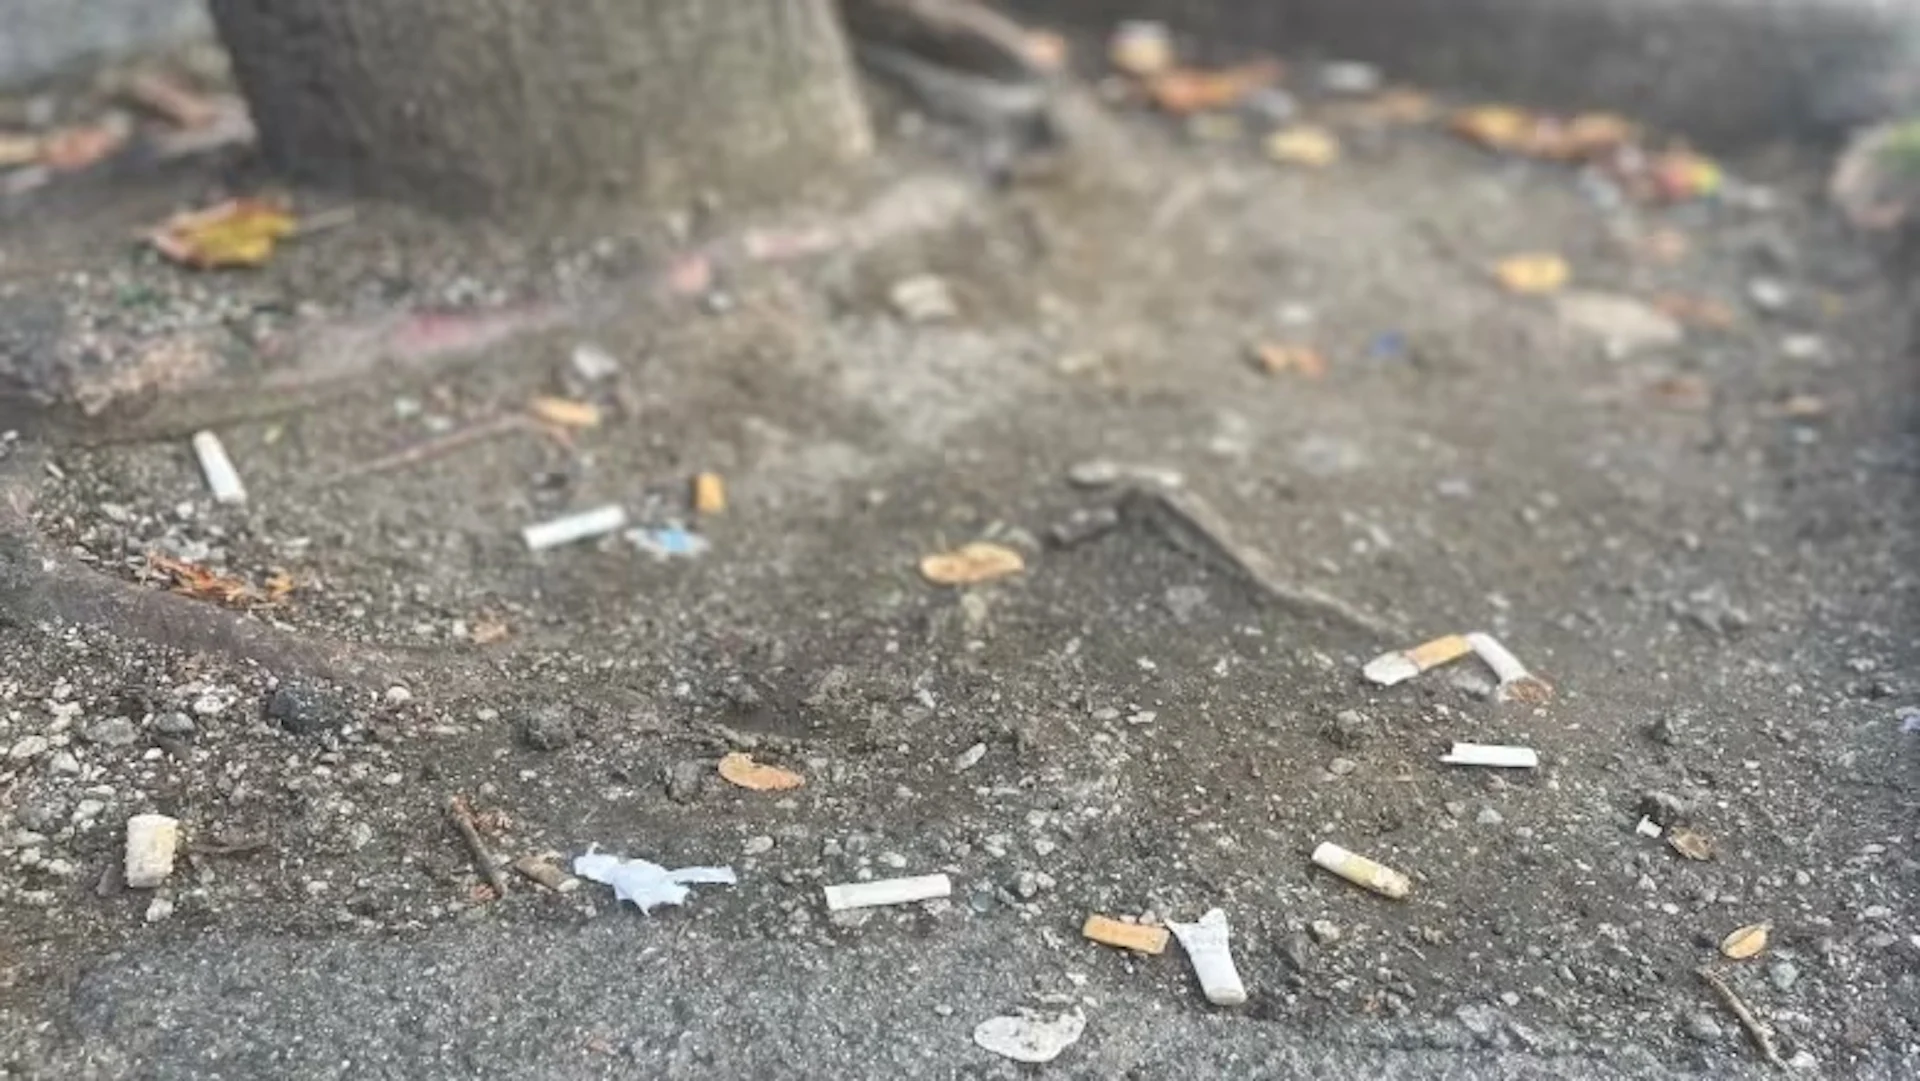 Cigarette butts still Vancouver's most littered item, seemingly unsolvable issue